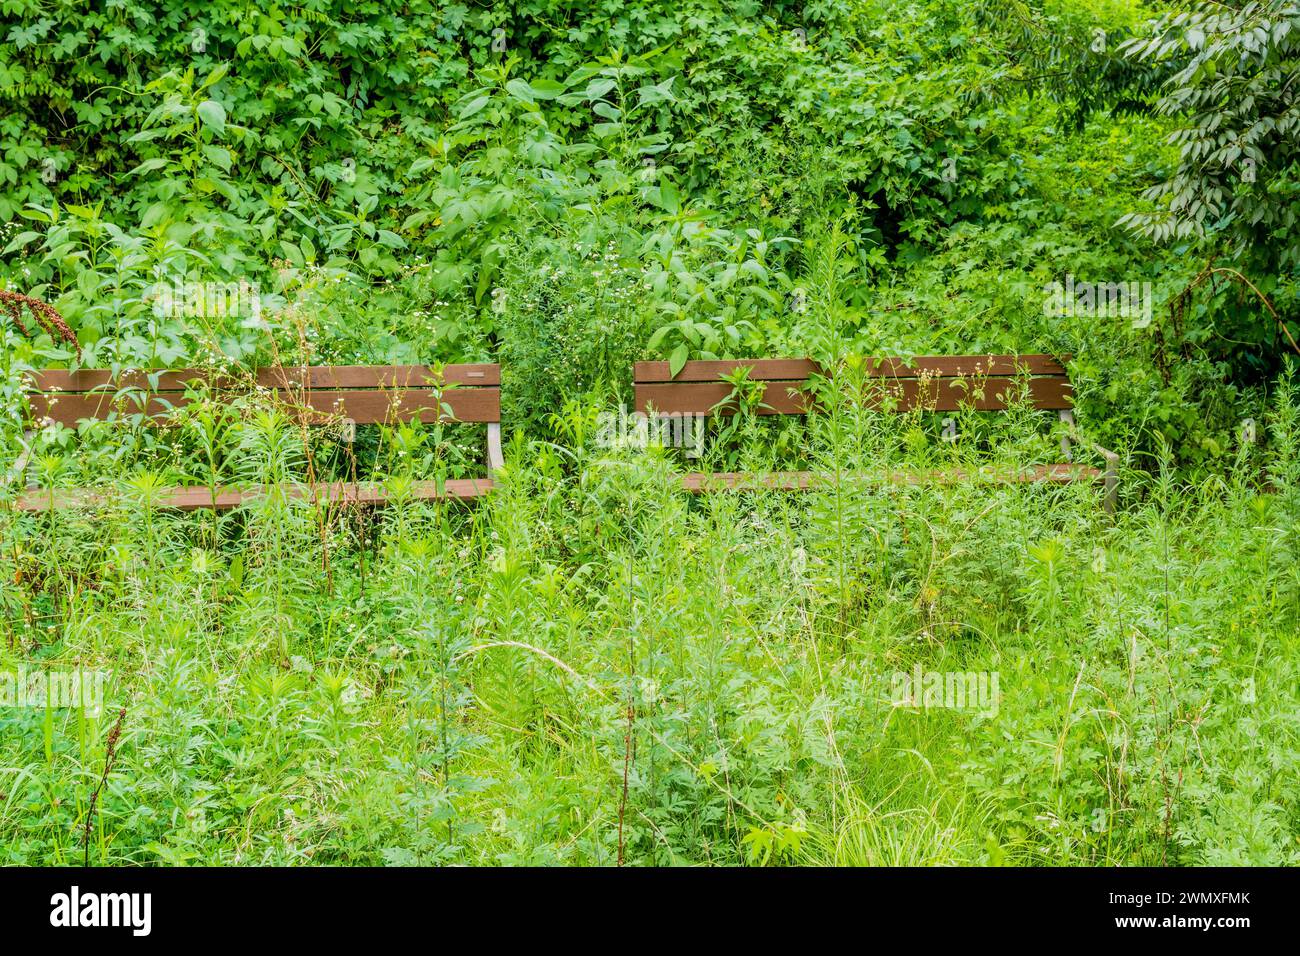 Wooden park benches barely visible in overgrown grass and weeds in South Korea Stock Photo